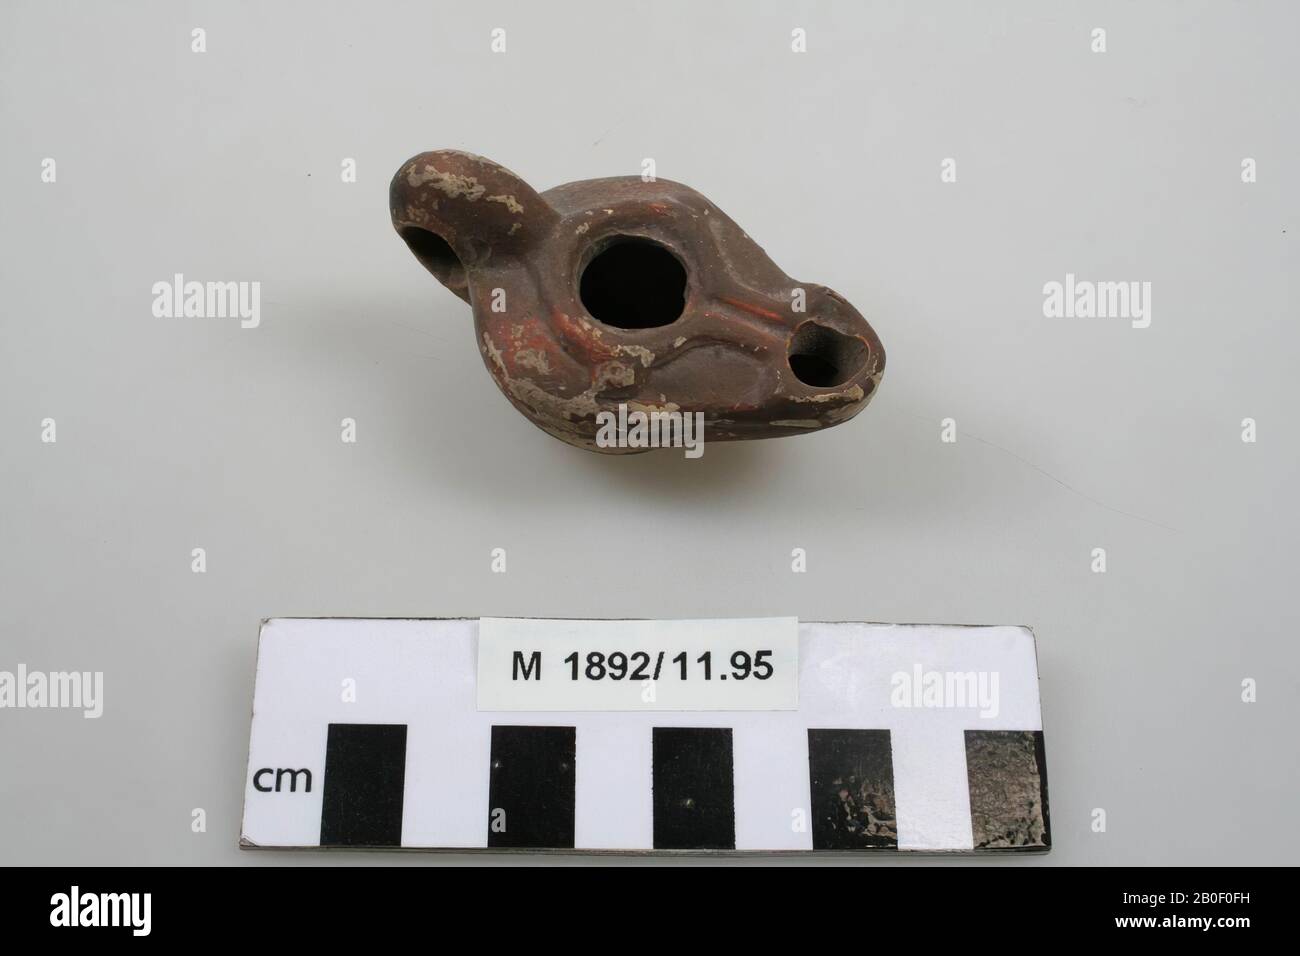 Pottery oil lamp, with ear, spout, filler hole and burner hole, oil lamp, earthenware, 7 x 4 x 3.3 cm, roman, Germany, unknown, unknown, Xanten Stock Photo